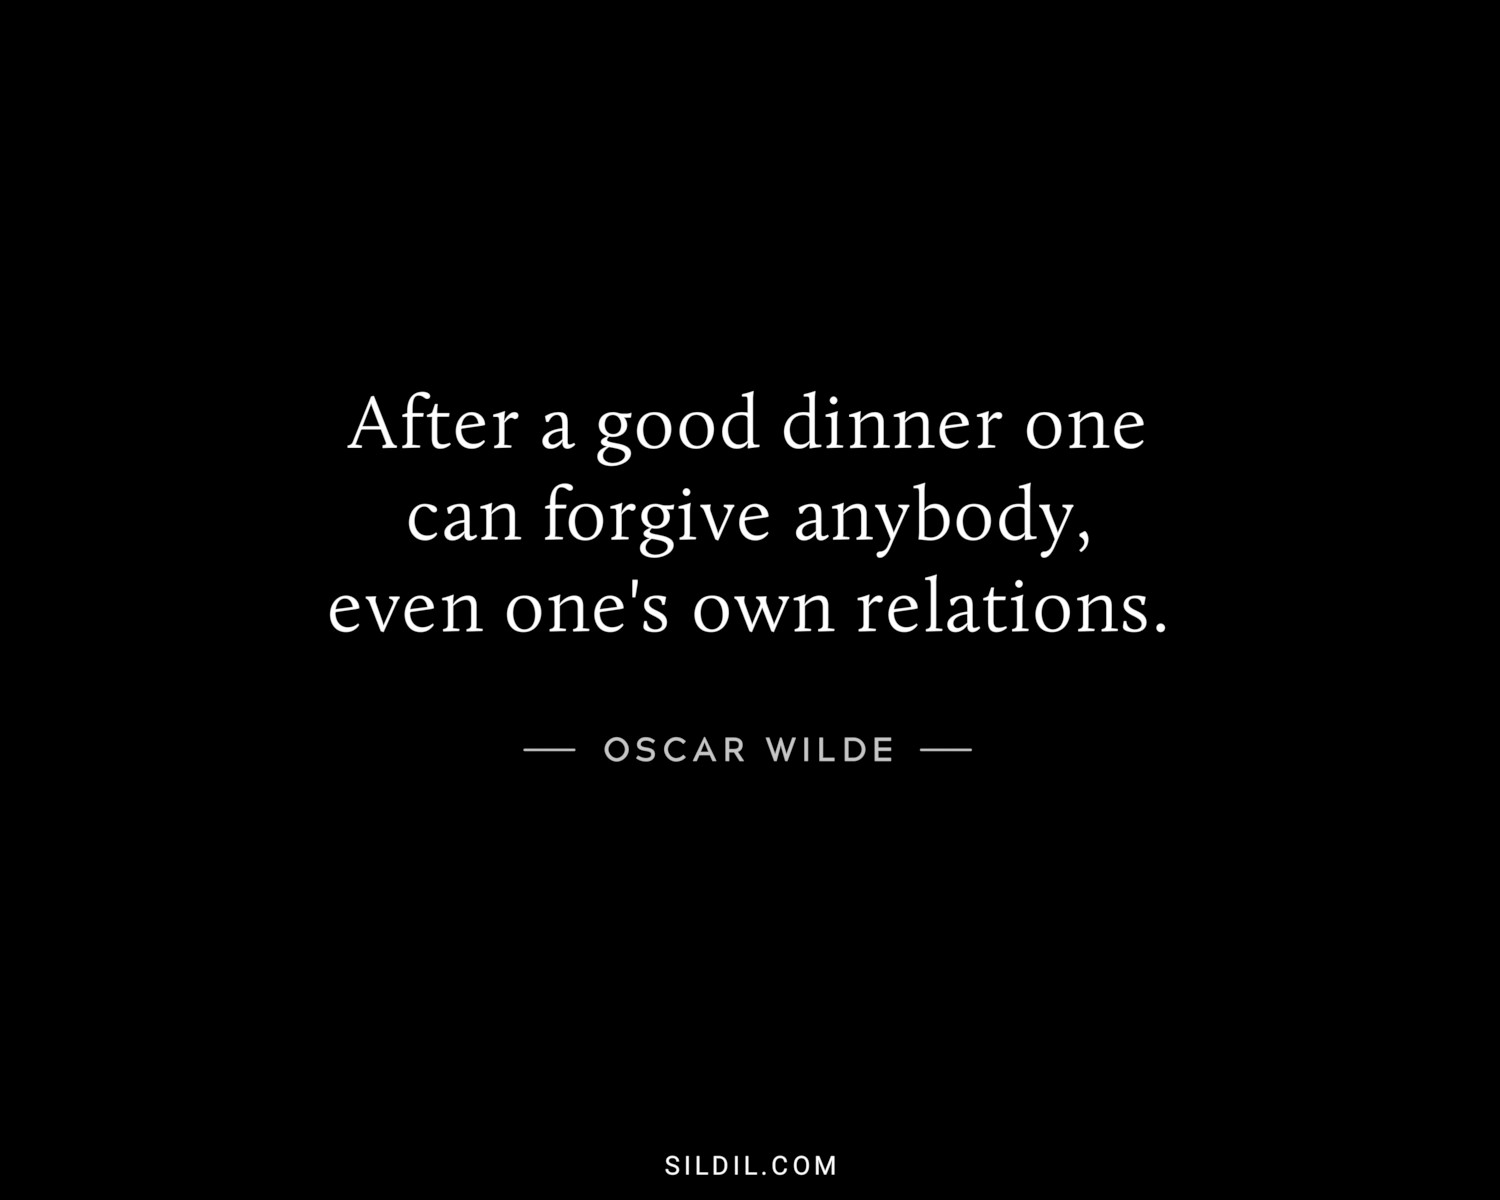 After a good dinner one can forgive anybody, even one's own relations.